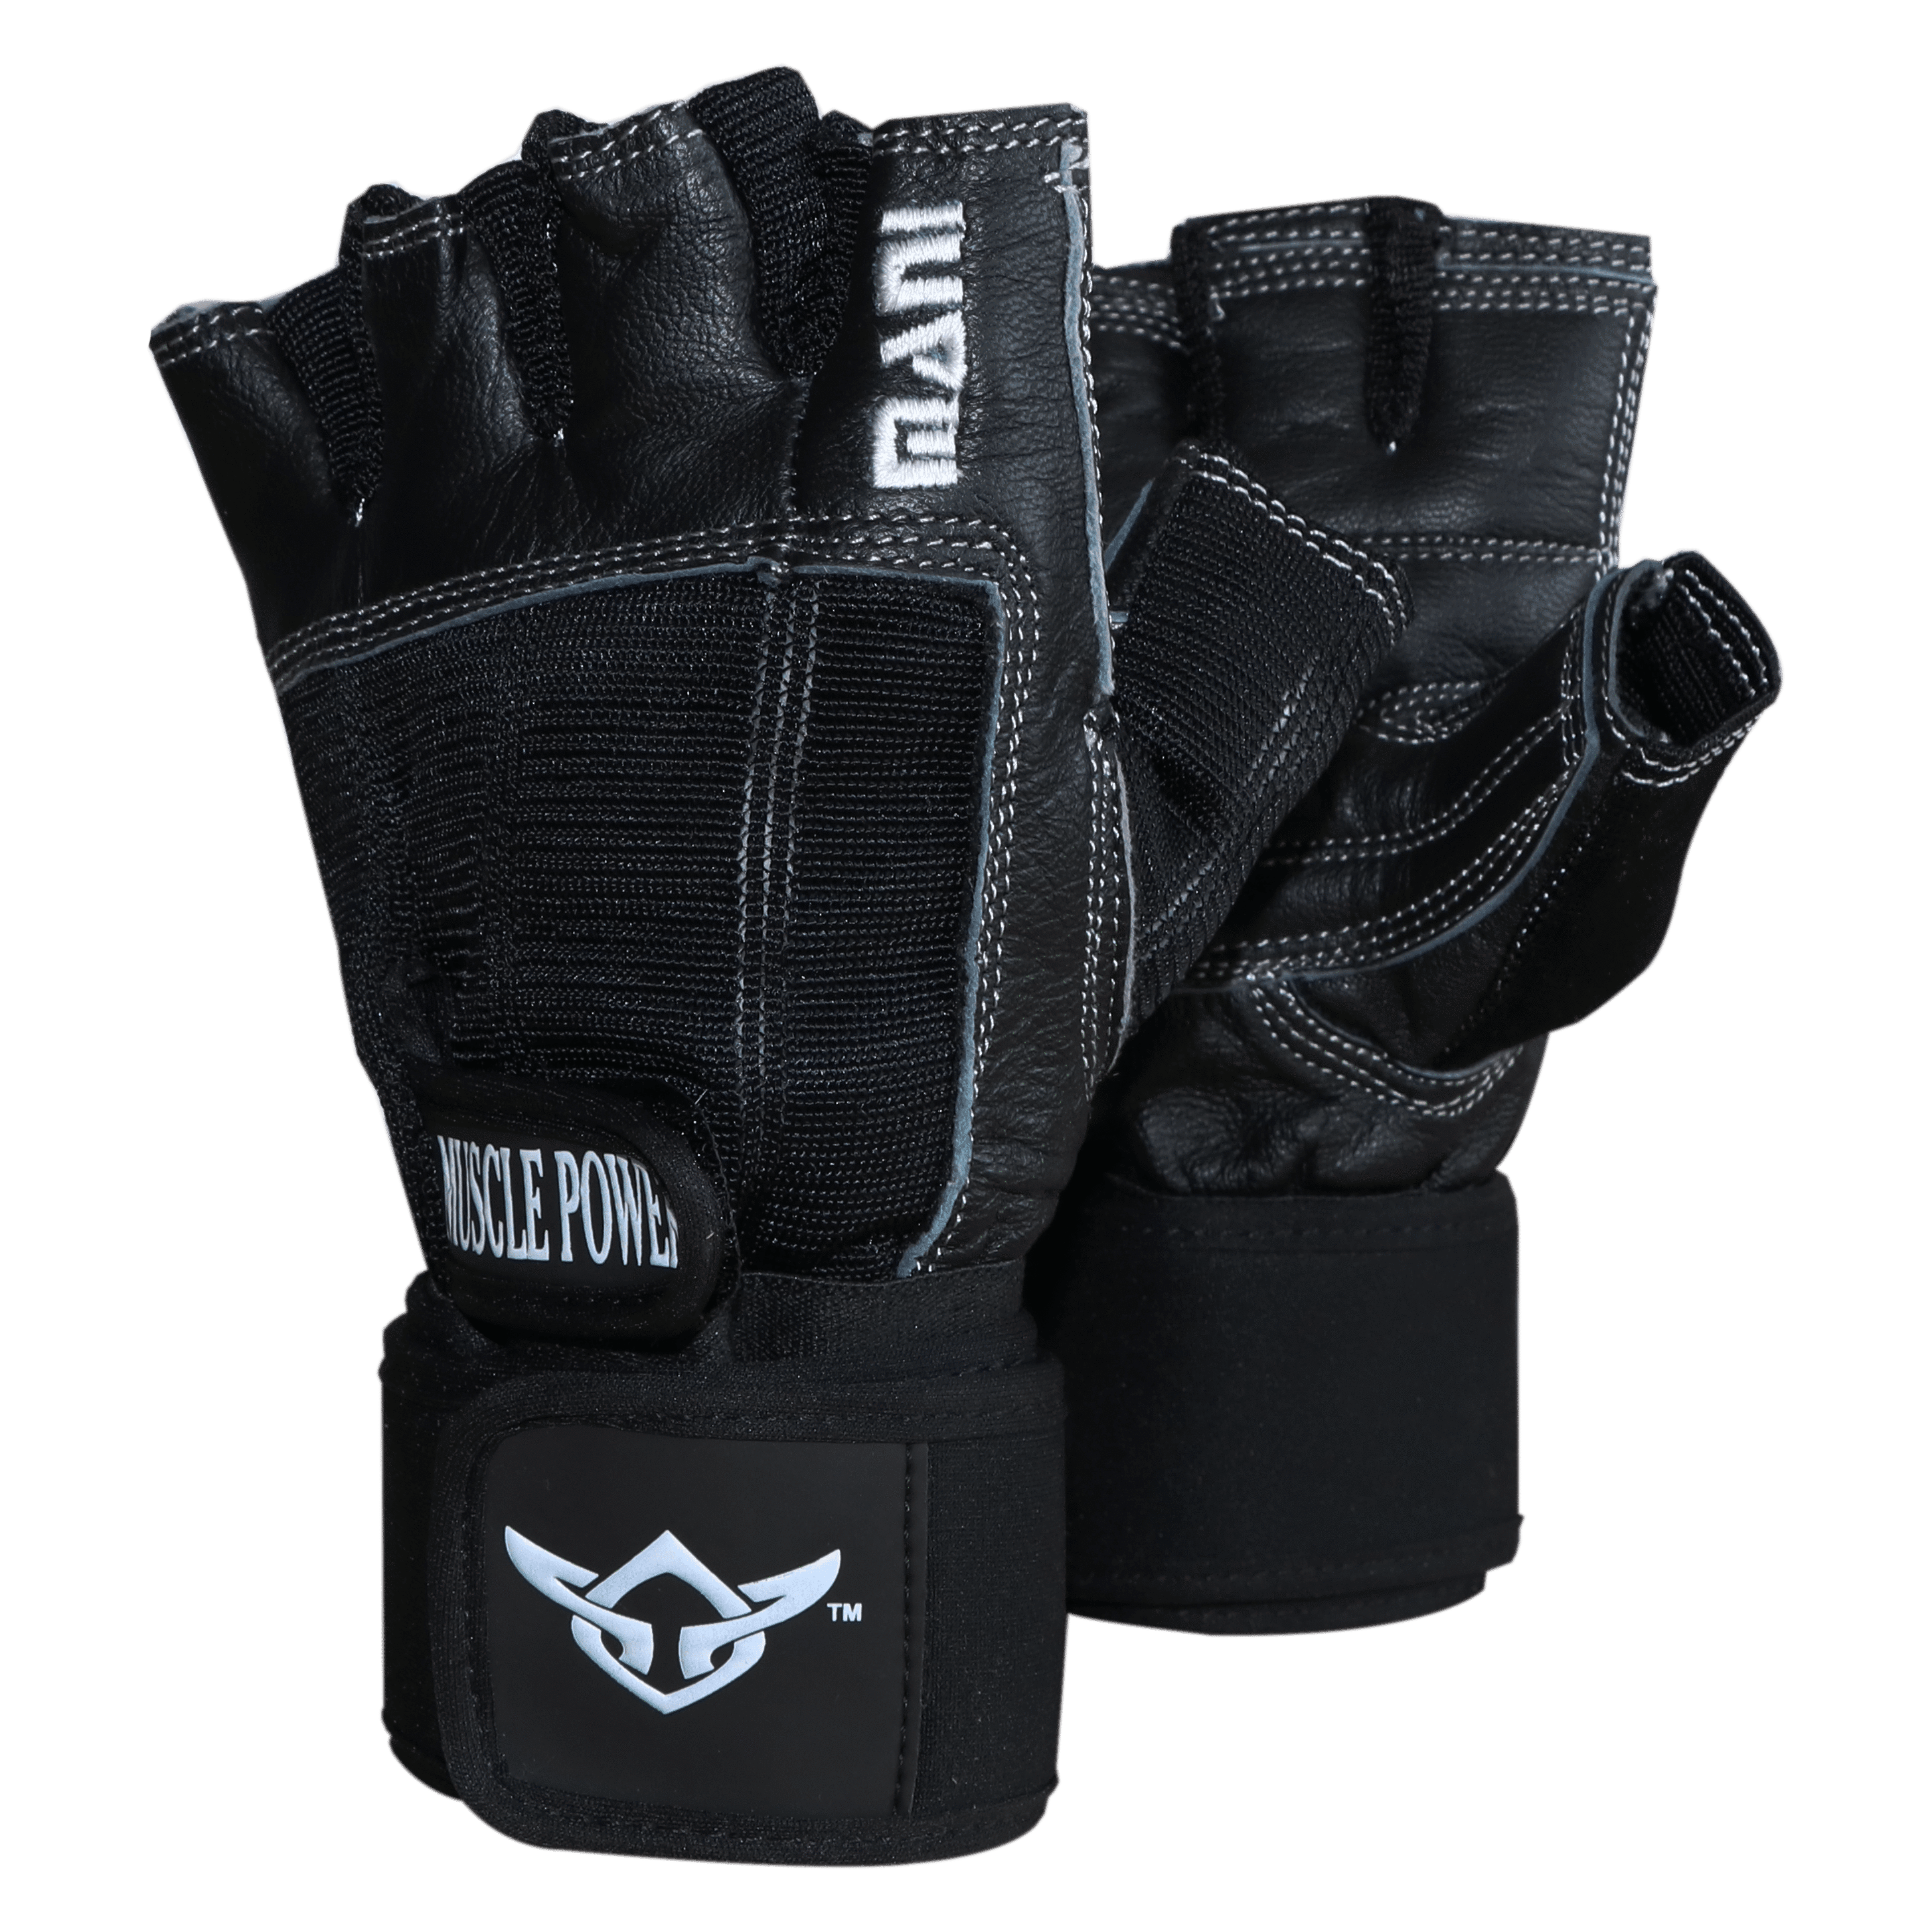 Deluxe Leather Muscle Power Gloves